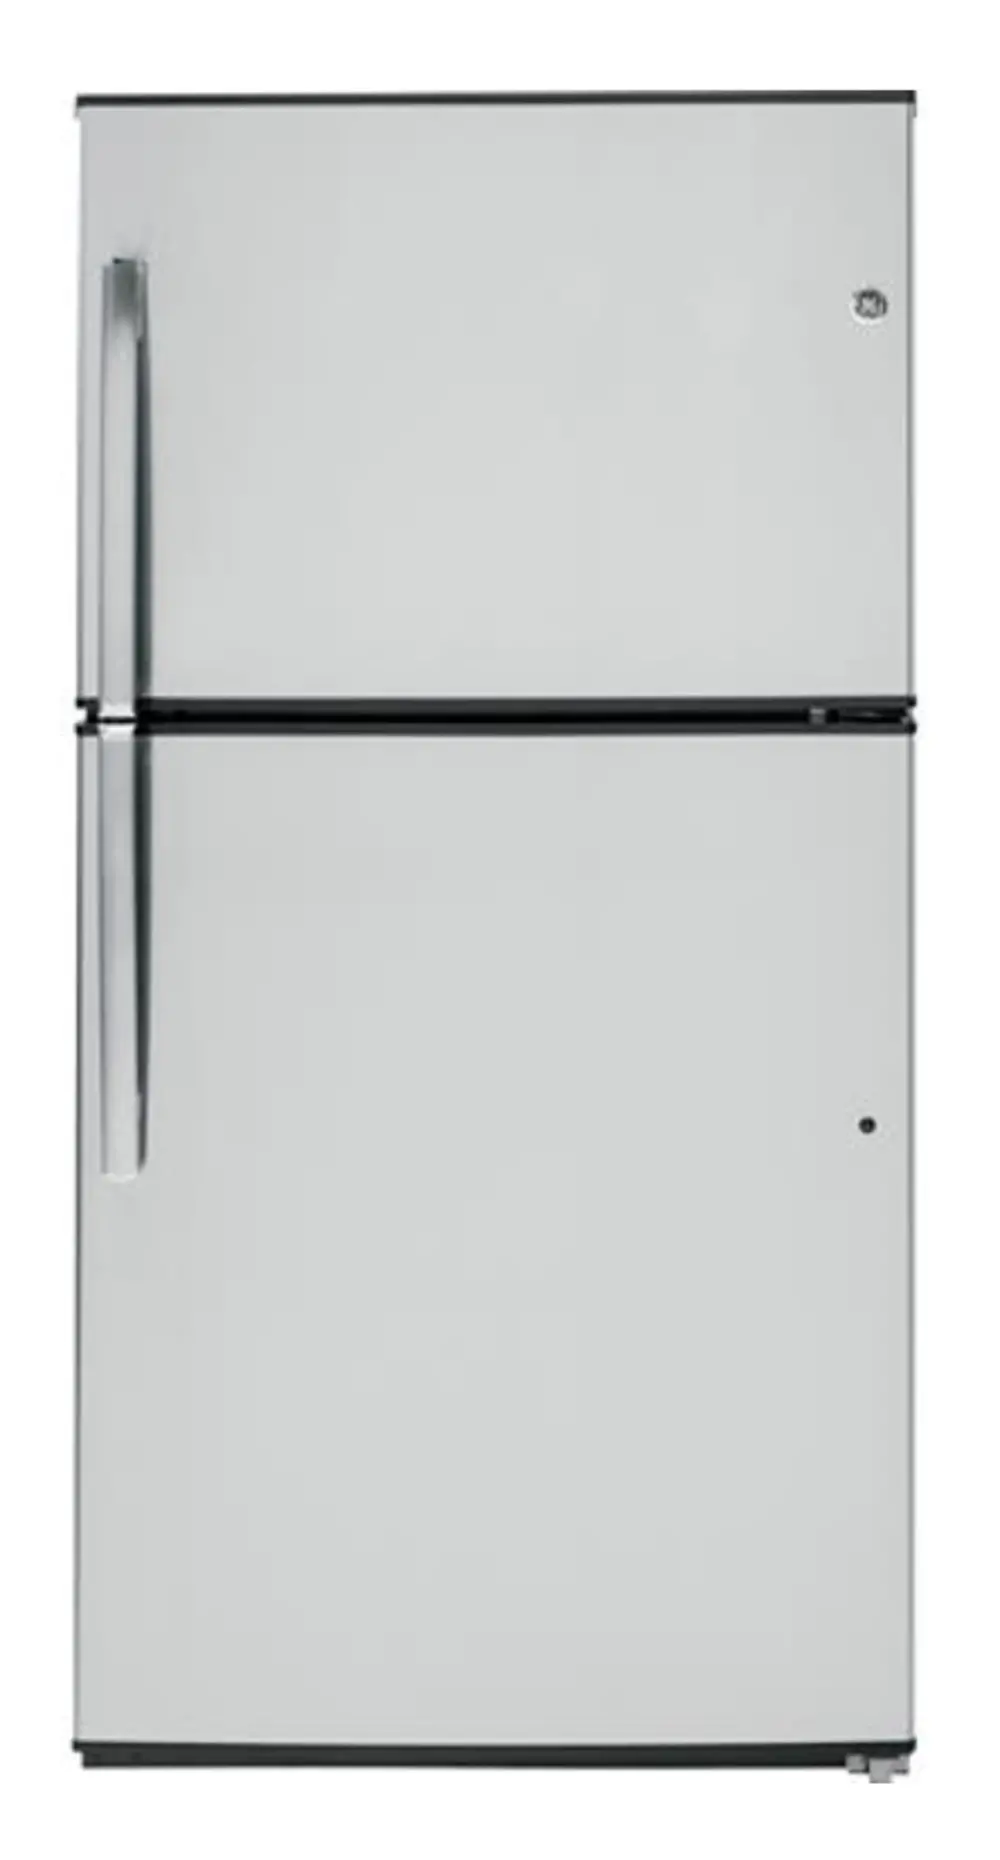 GTE21GSHSS GE Top Freezer Refrigerator with Upfront Temperature Controls - 33 Inch Stainless Steel-1